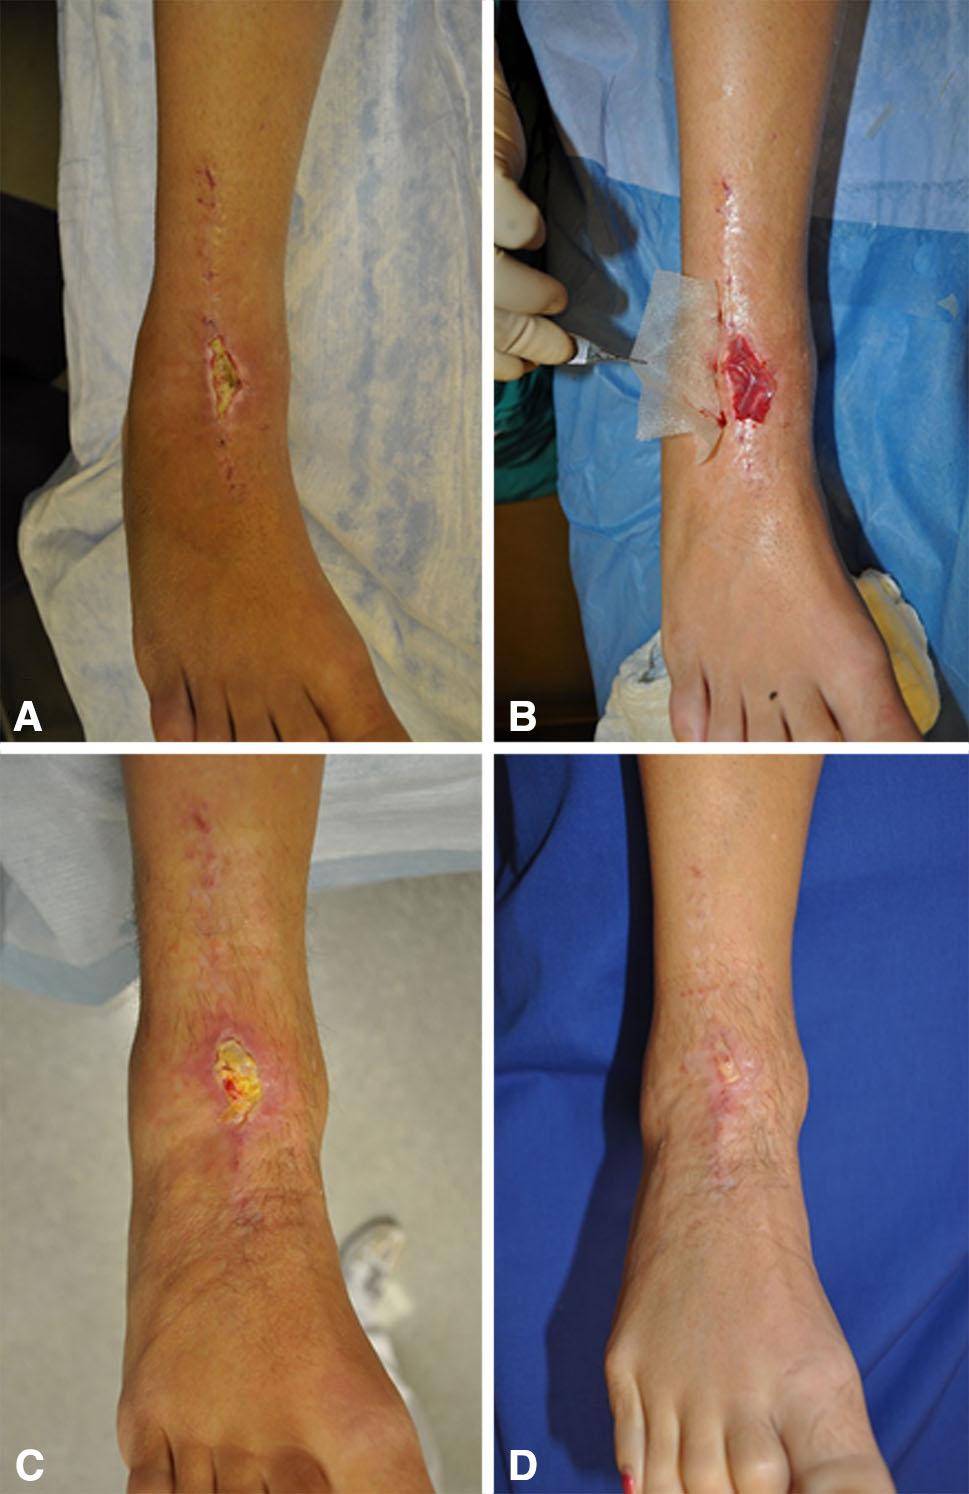 1928 Cho et al. Clinical Orthopaedics and Related Research 1 Fig. 4A D A 61-year-old woman with ankle arthritis underwent total ankle arthroplasty.